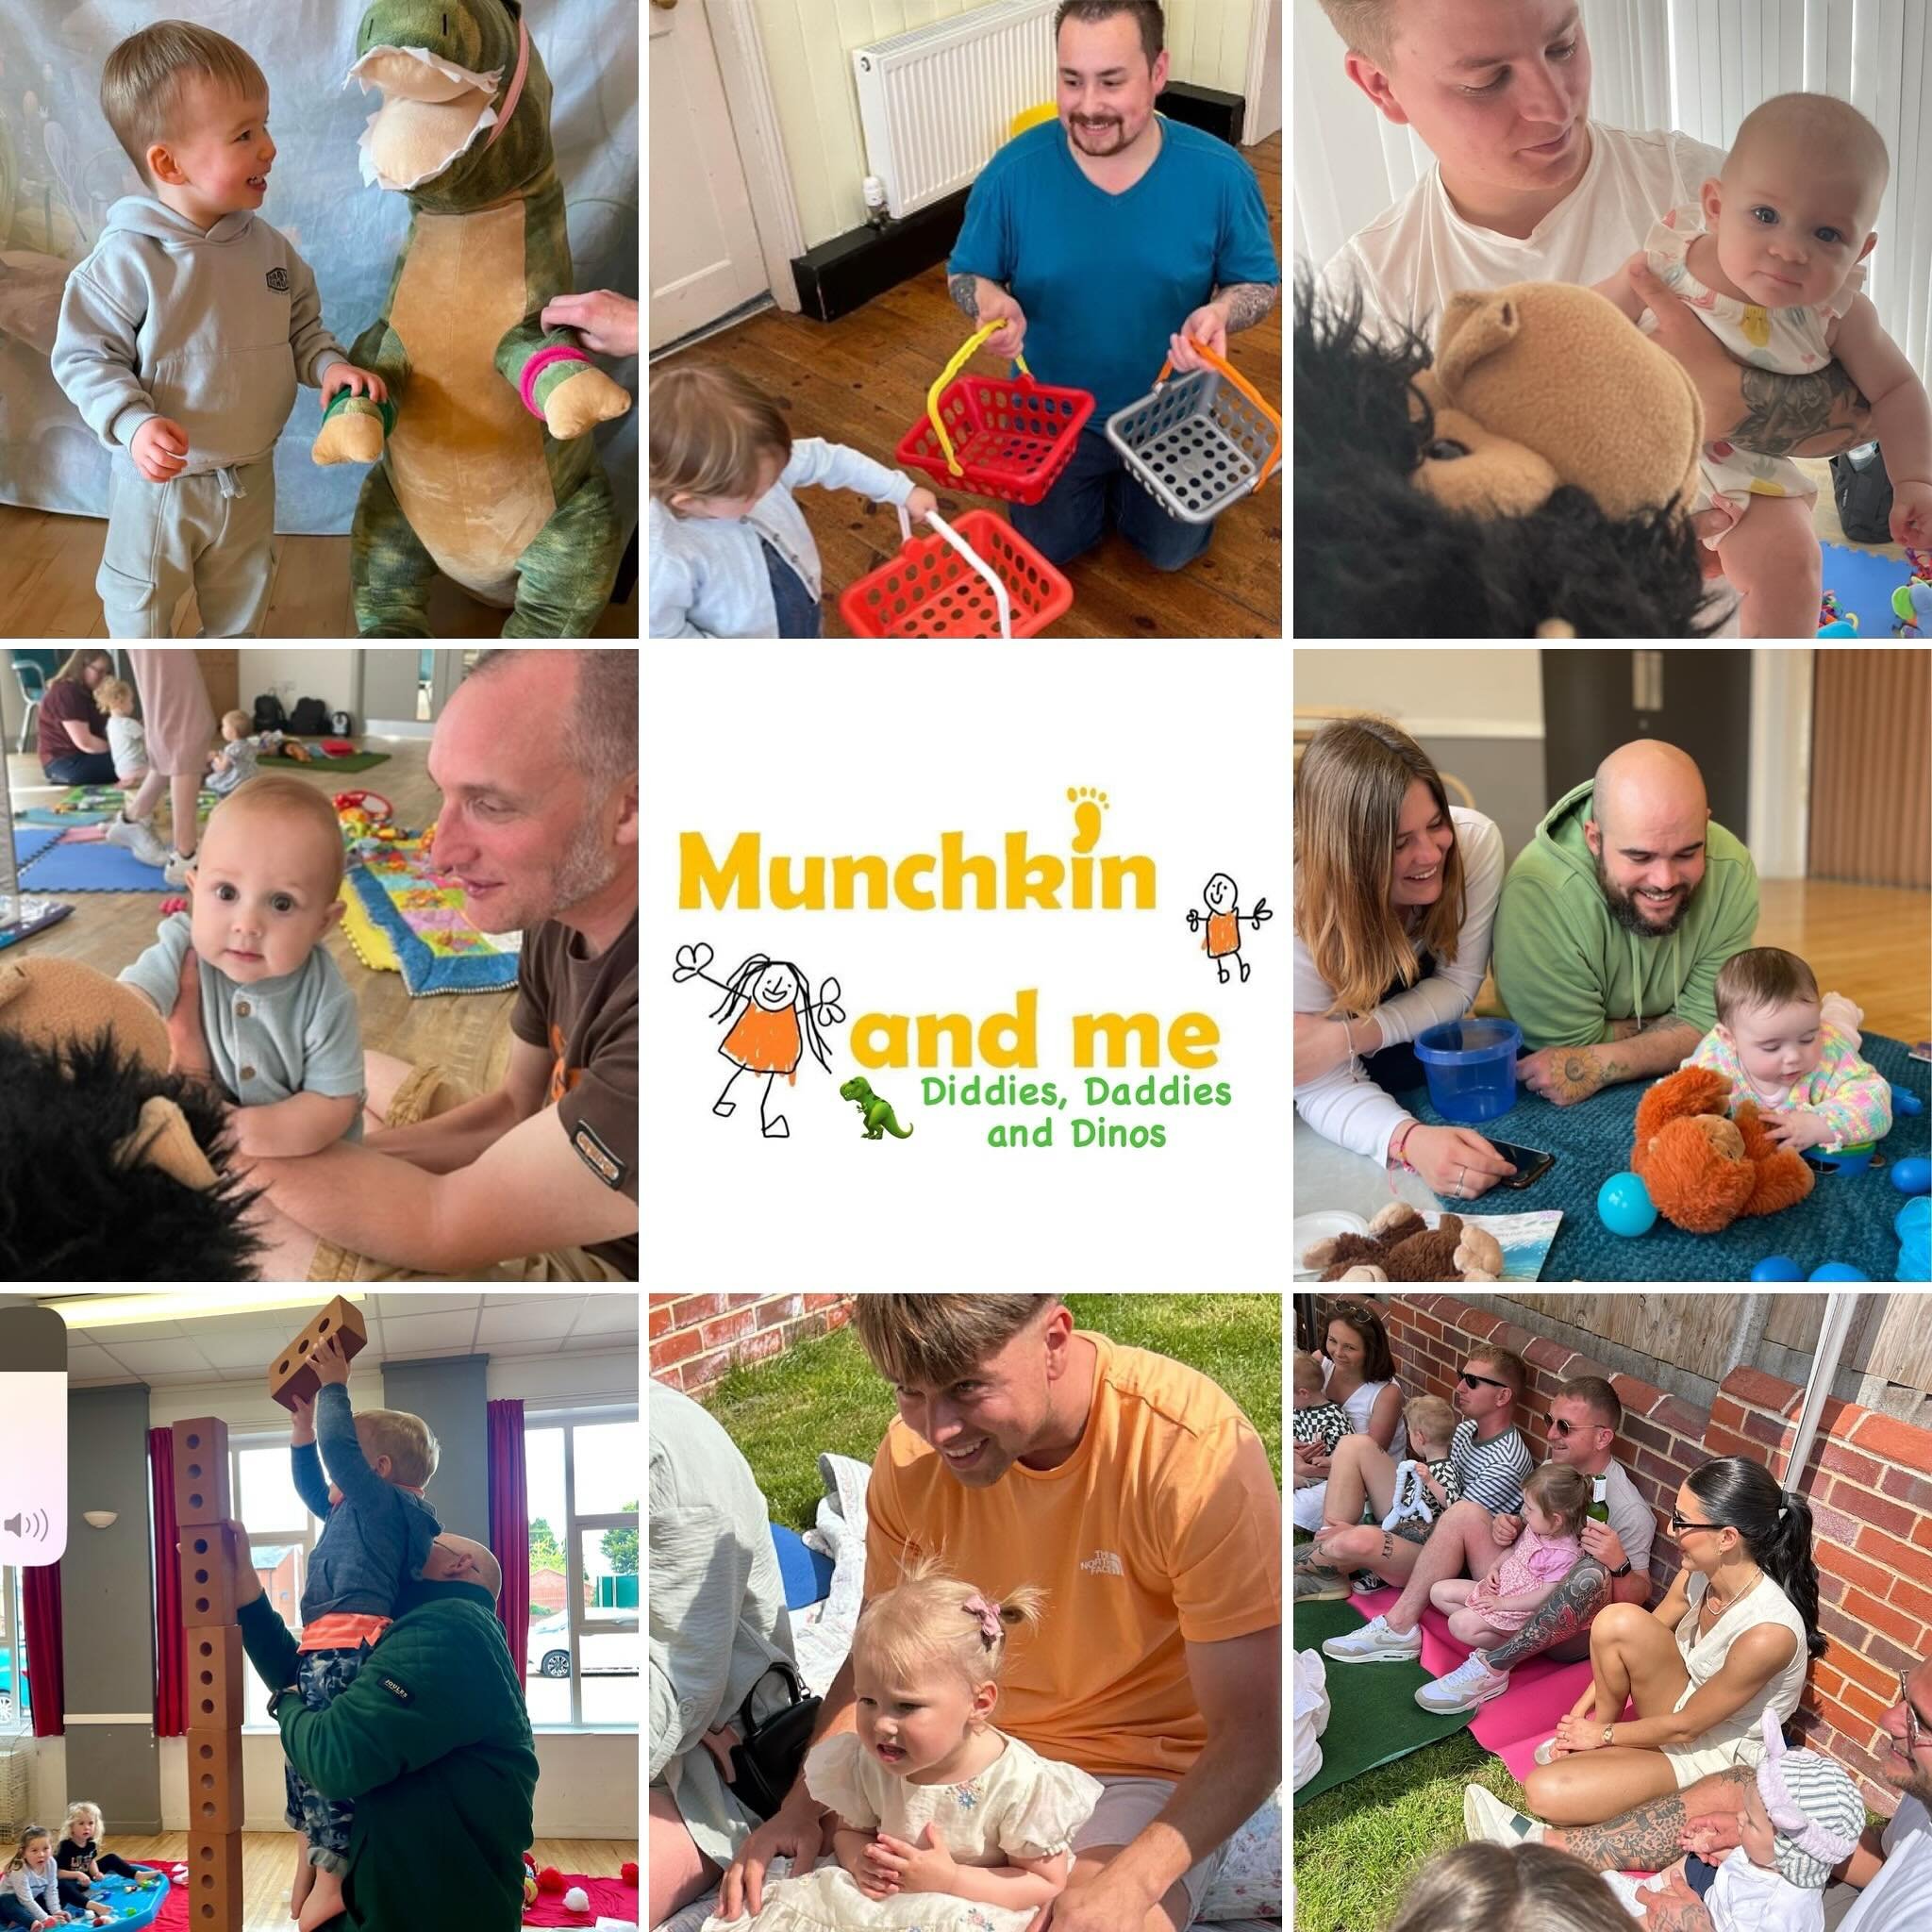 📣 Have you made plans for Father&rsquo;s Day yet? 

⭐️ Looking for a fun, exciting and unique way to celebrate the special men in your munchkins life? 

Book now to join our Diddies, Daddies and Dinos sessions at @stables_norfolk @theffolkes on Fath